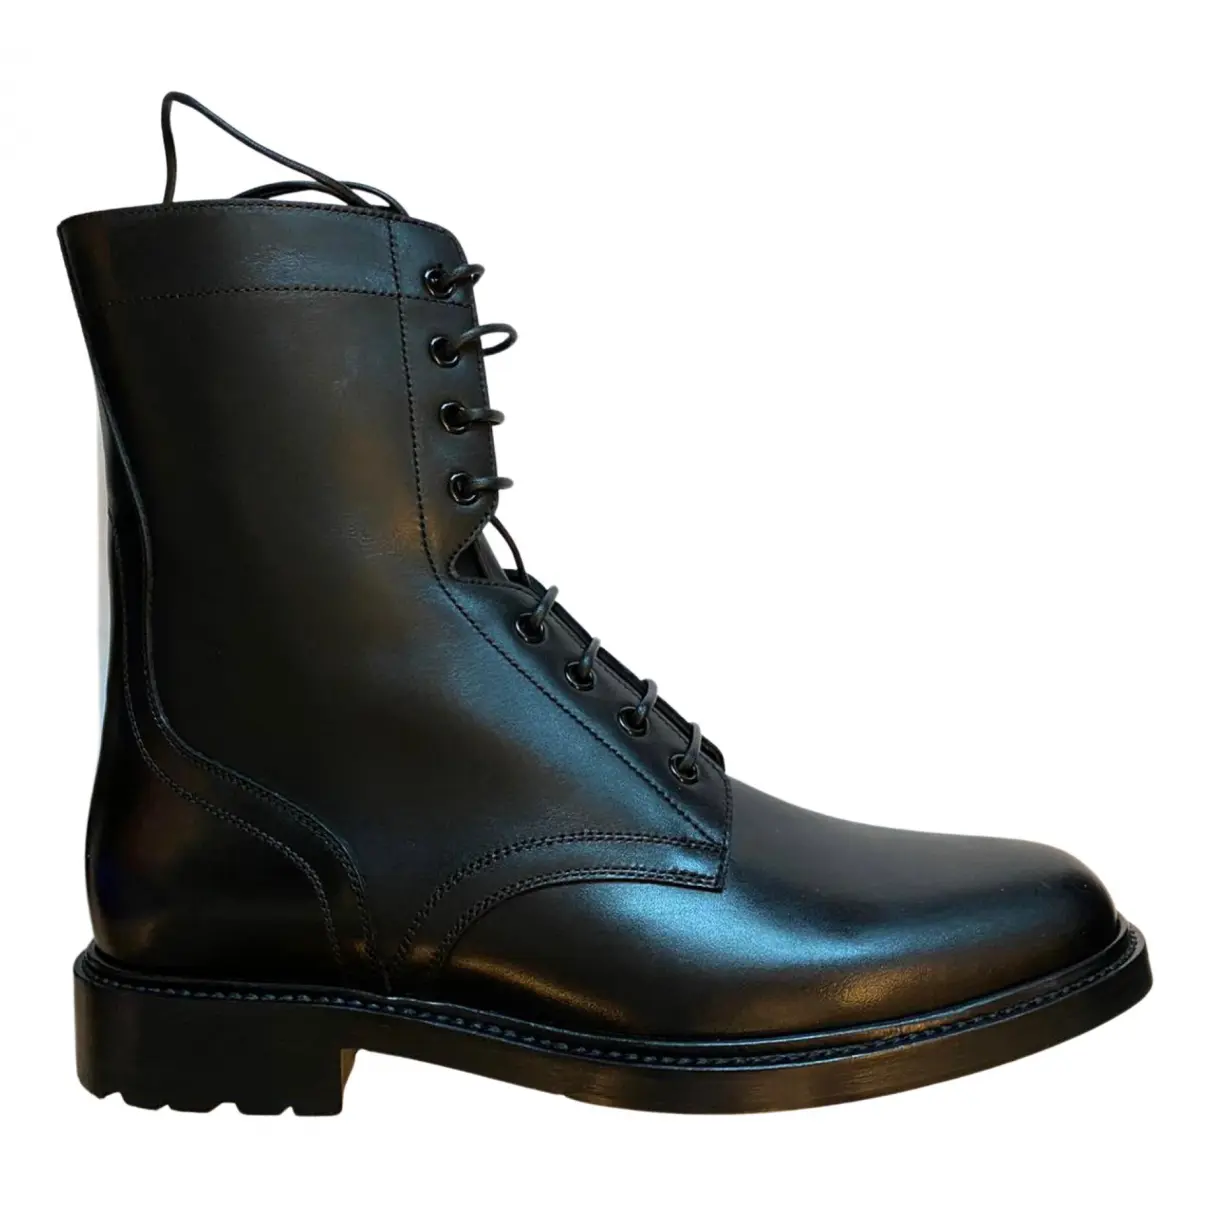 Academy leather boots Celine